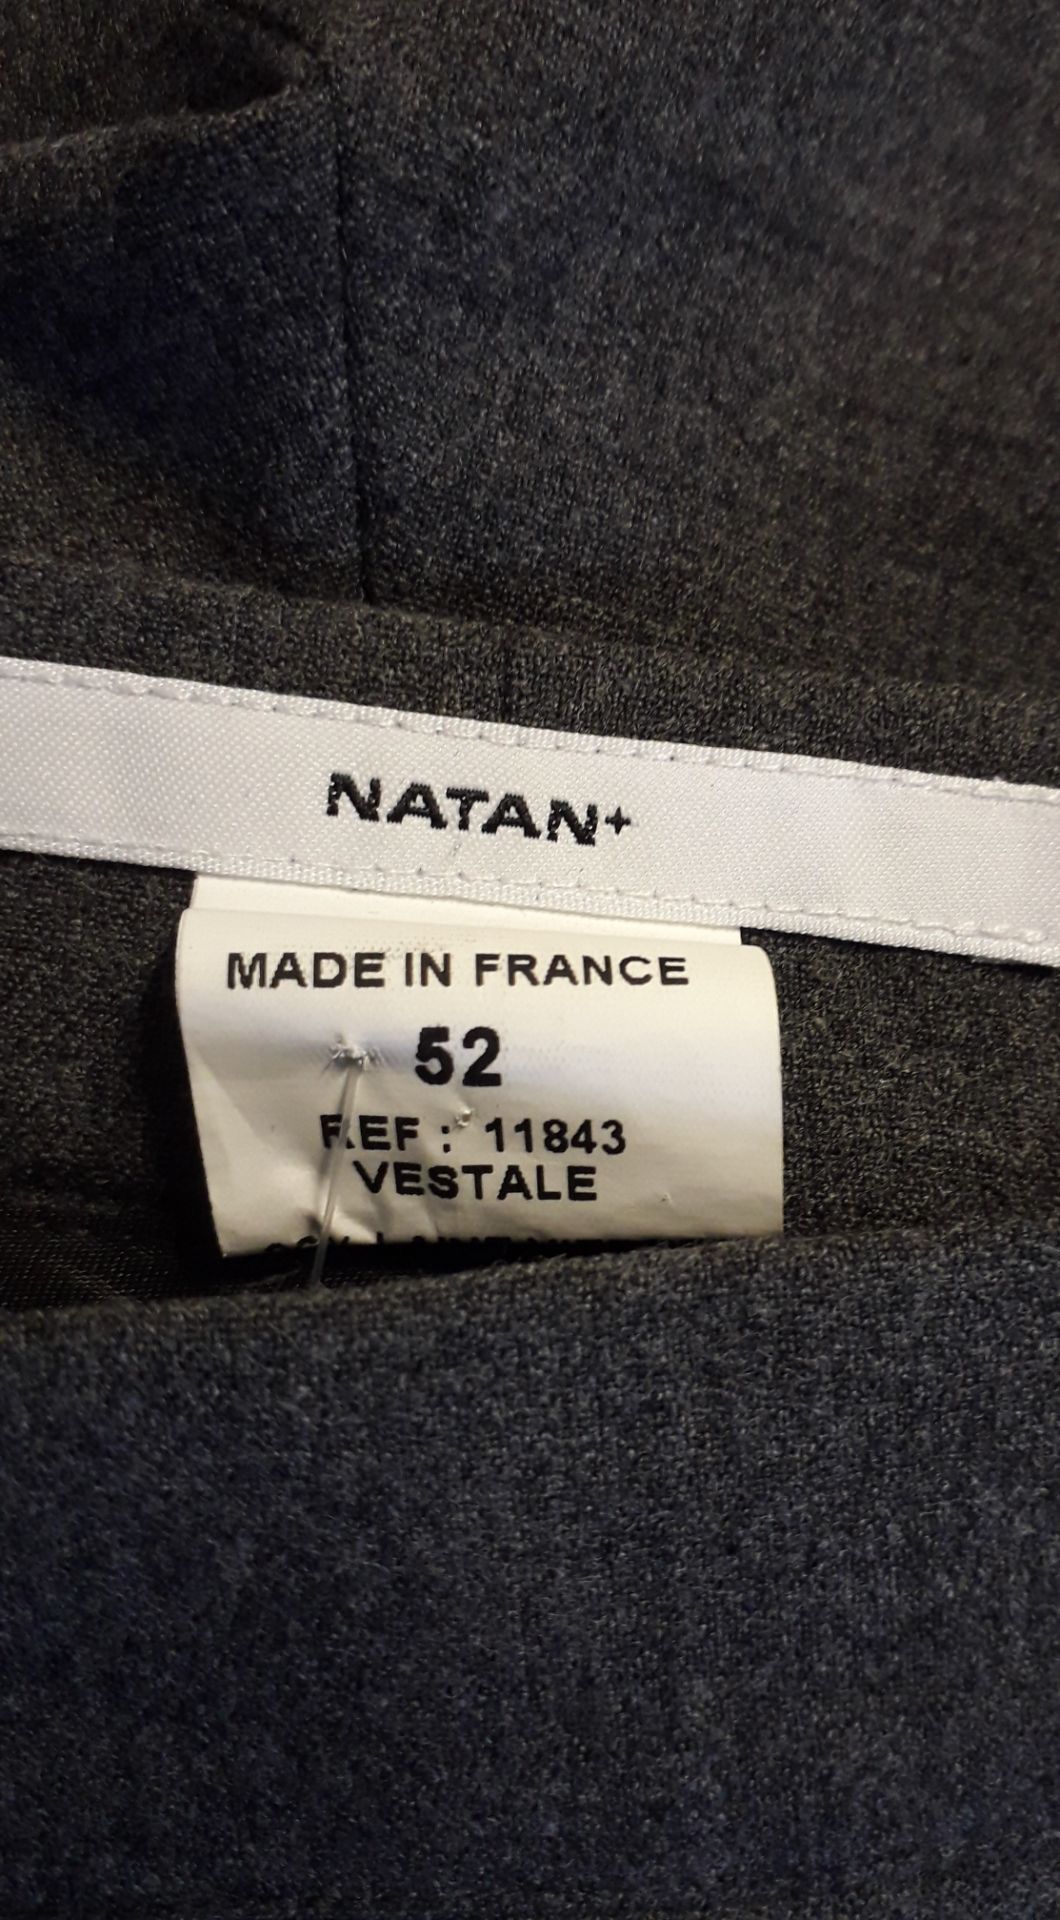 1 x Natan Plus Charcoal Trousers - Size: 52 - Material: 96% Virgin Wool, 4% Elastane - From a High - Image 2 of 5